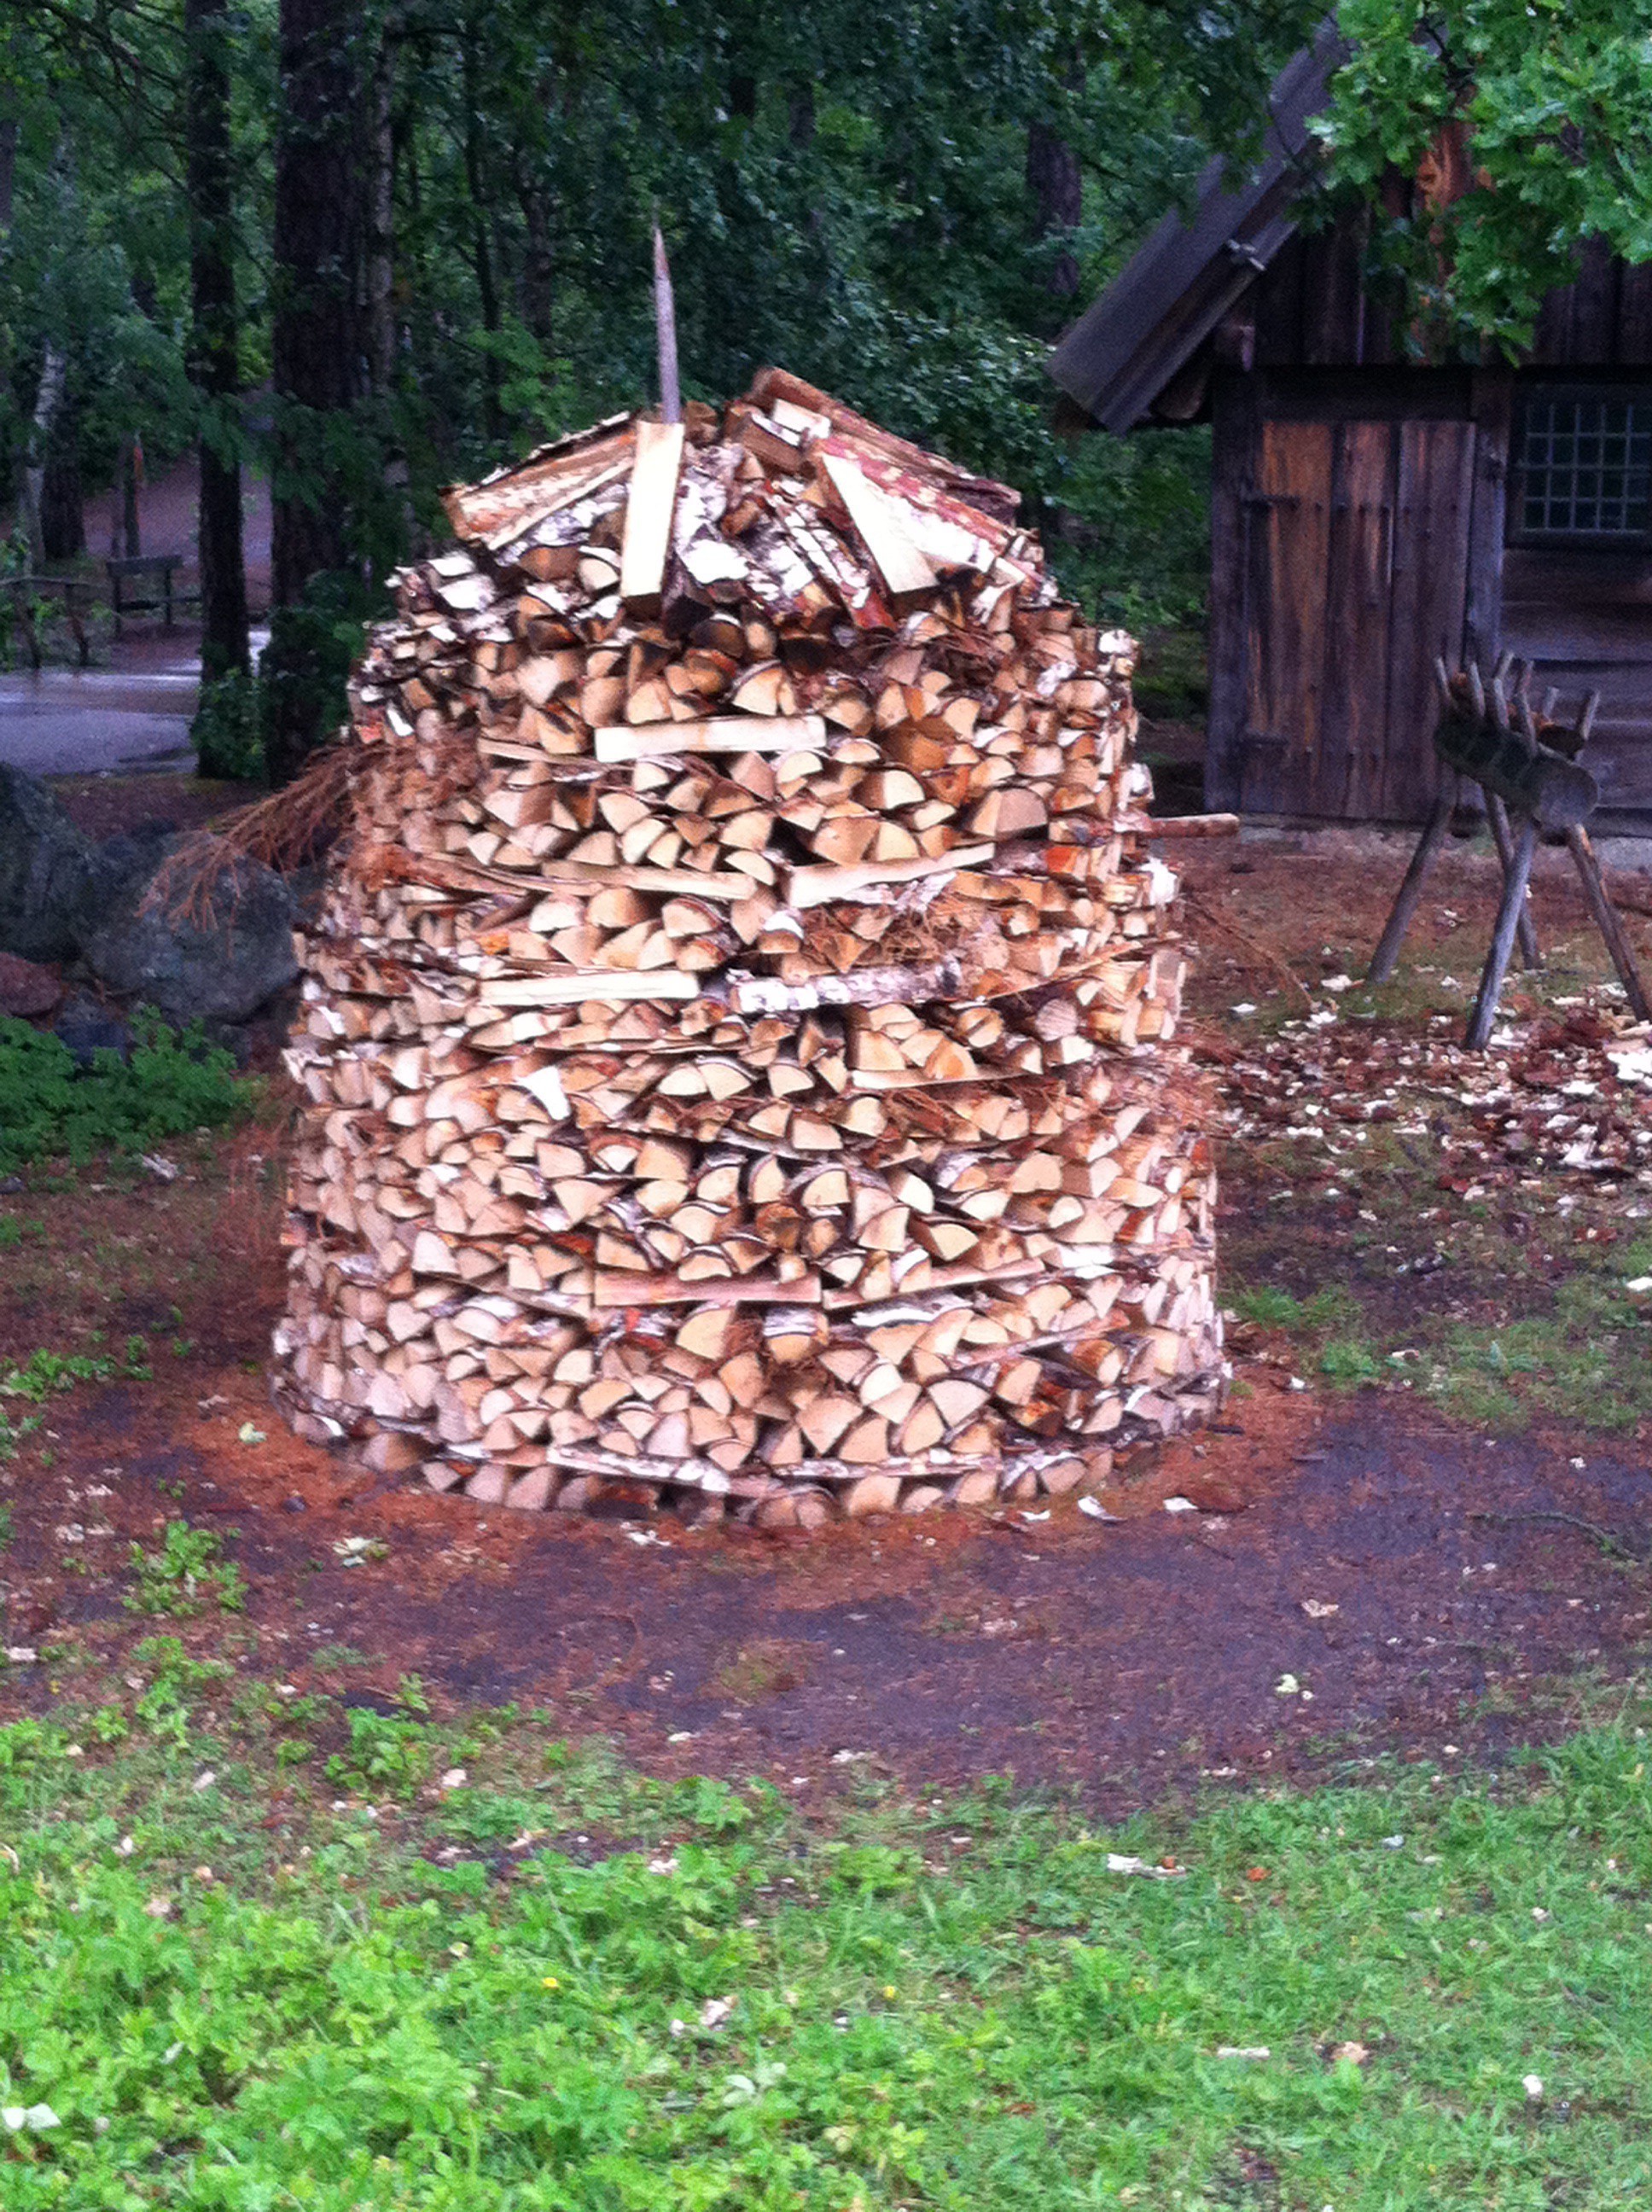 The firewood haystack